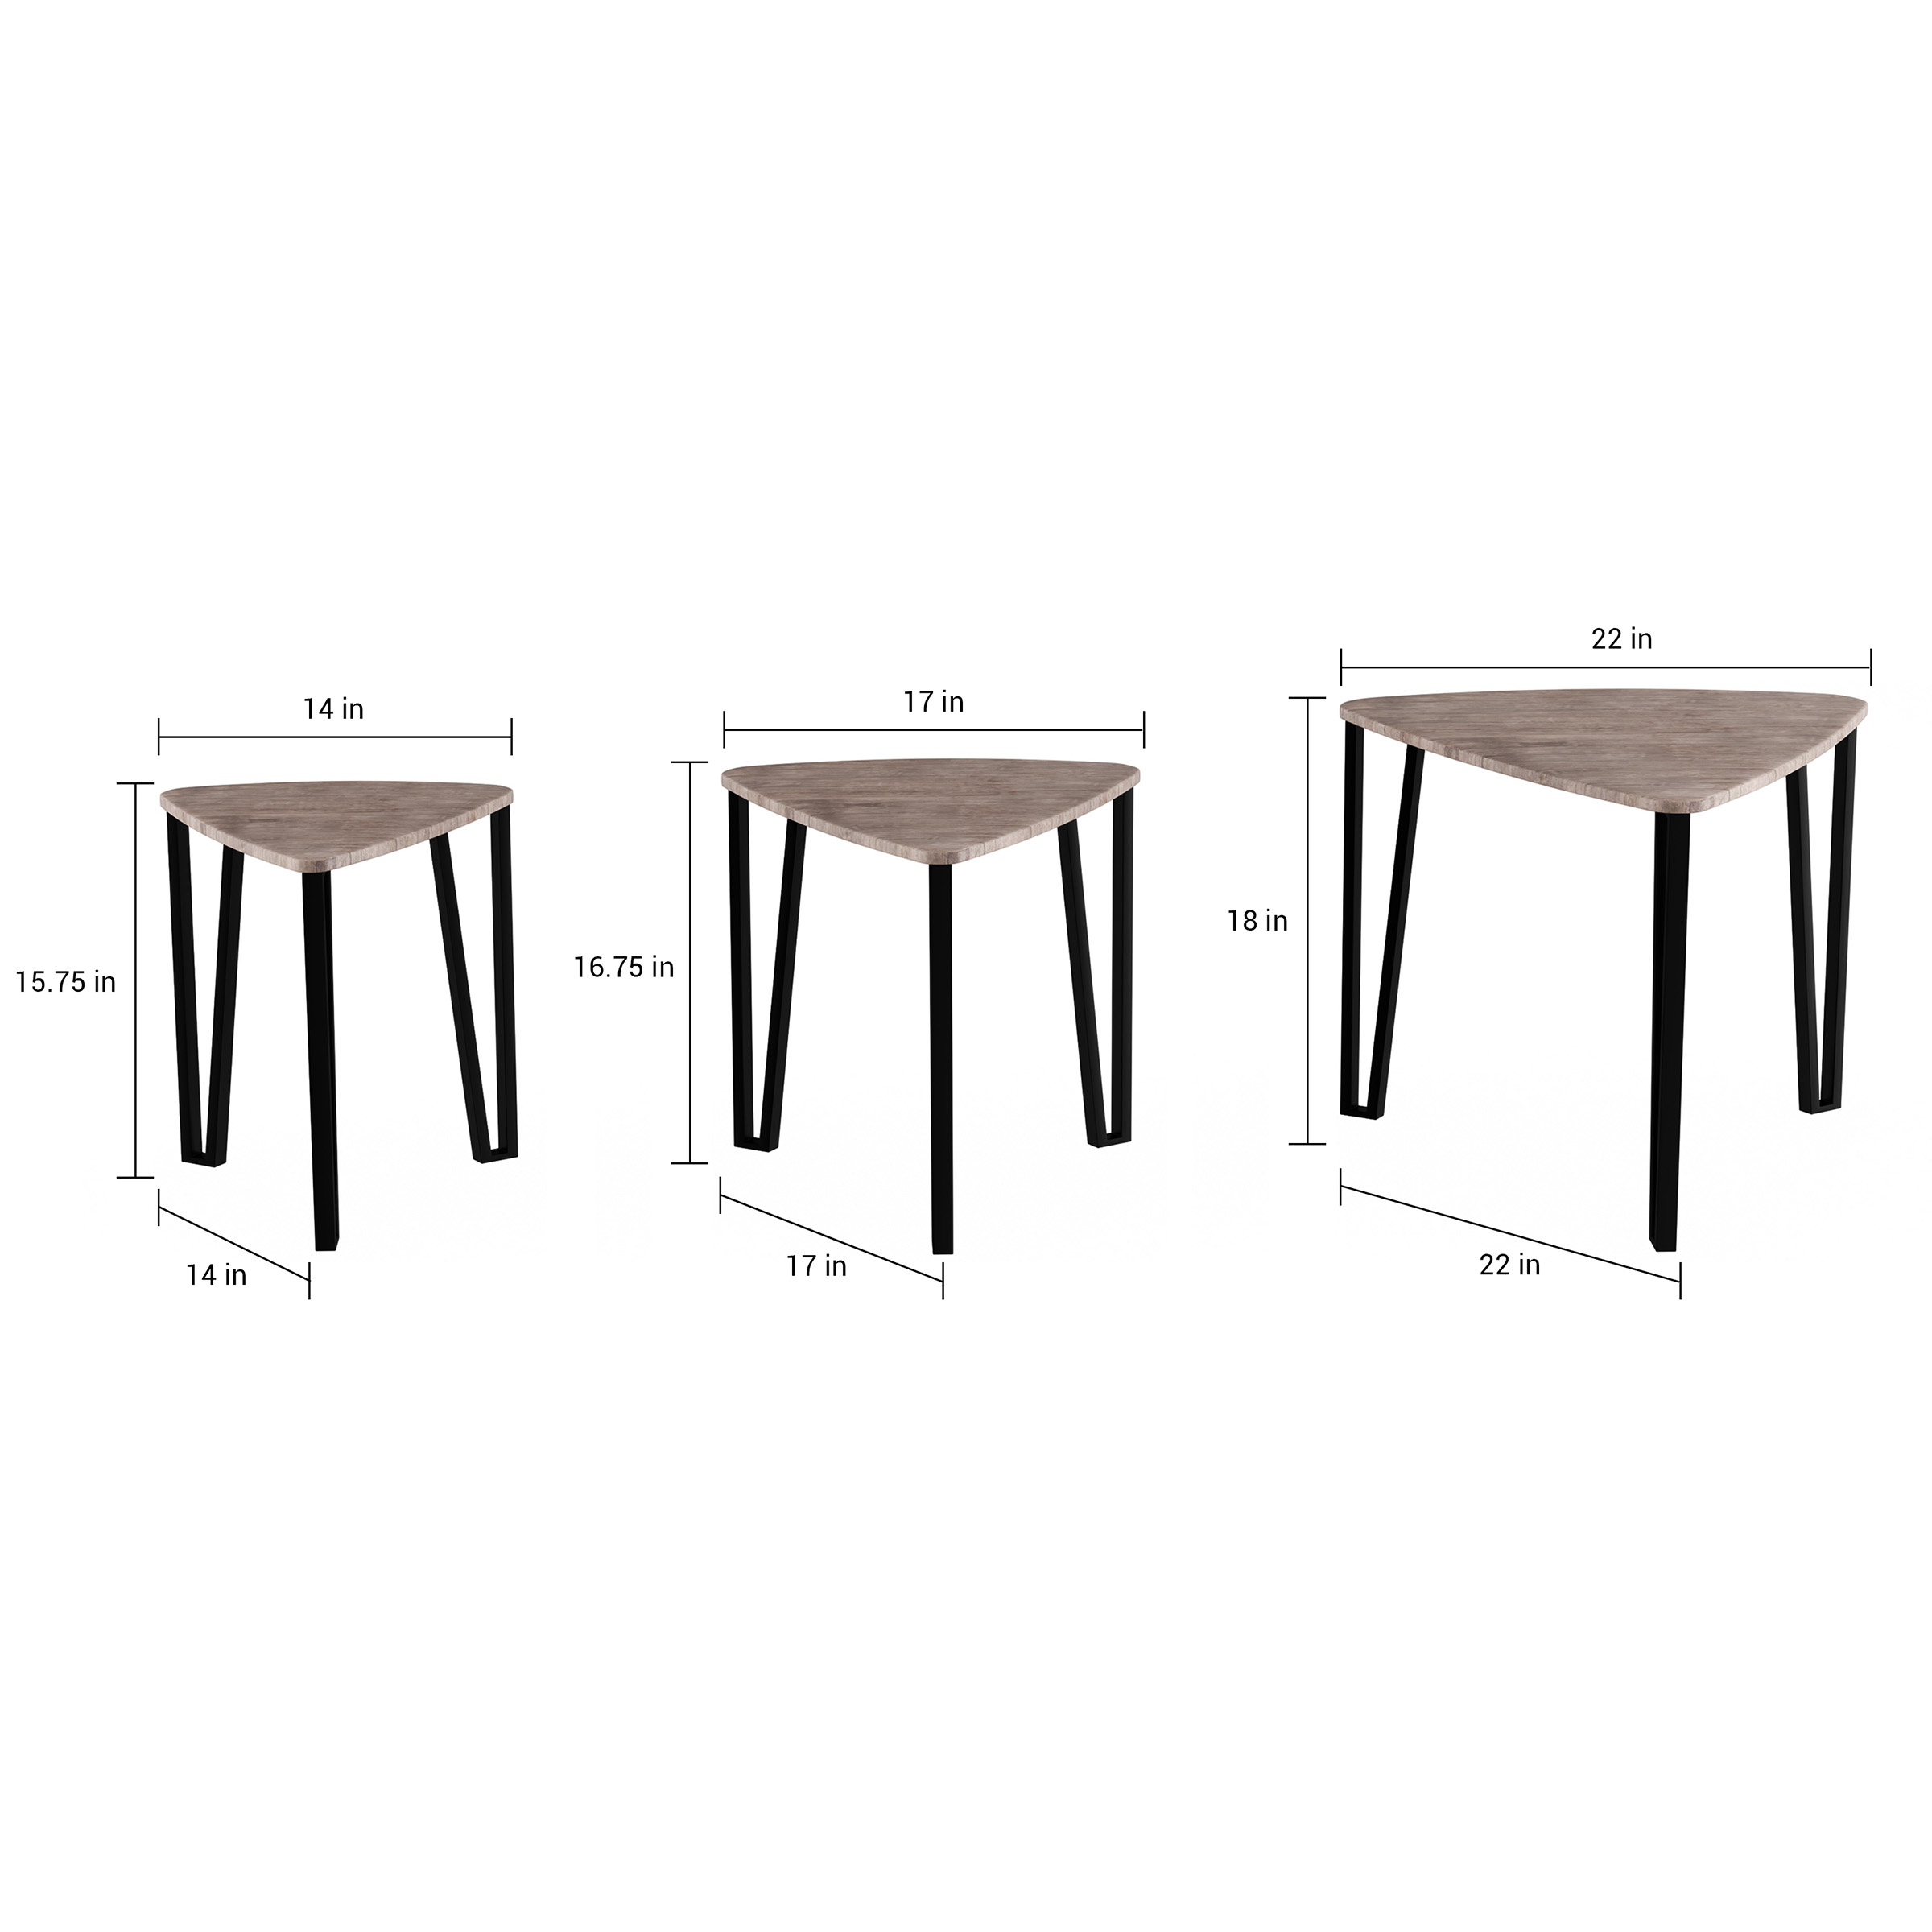 Nesting Tables-Set Of 3, Modern Woodgrain Look For Living Room Coffee Tables Or End Tables Contemporary Accent Decor Home Furniture